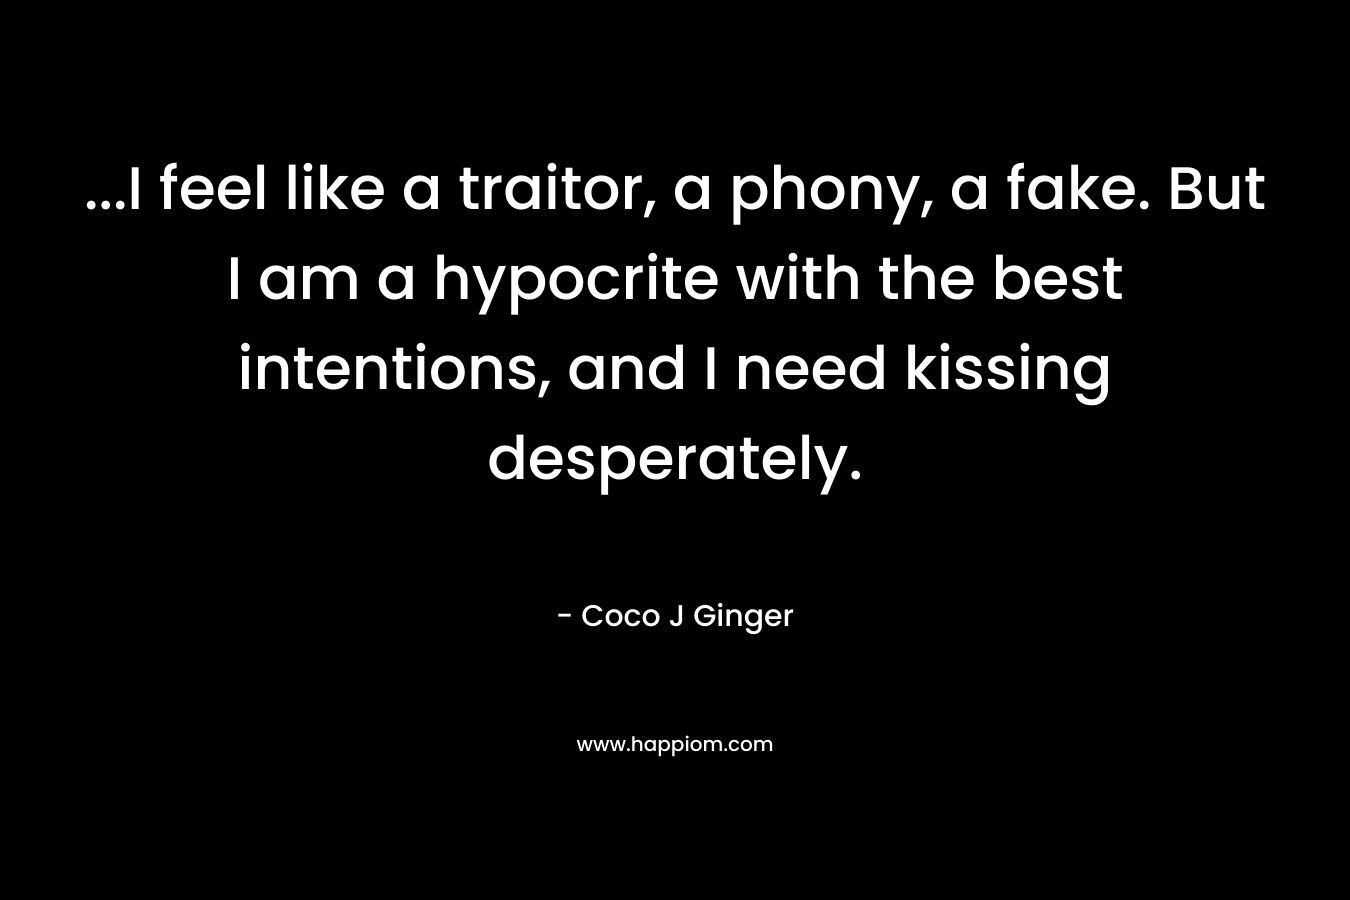 ...I feel like a traitor, a phony, a fake. But I am a hypocrite with the best intentions, and I need kissing desperately.